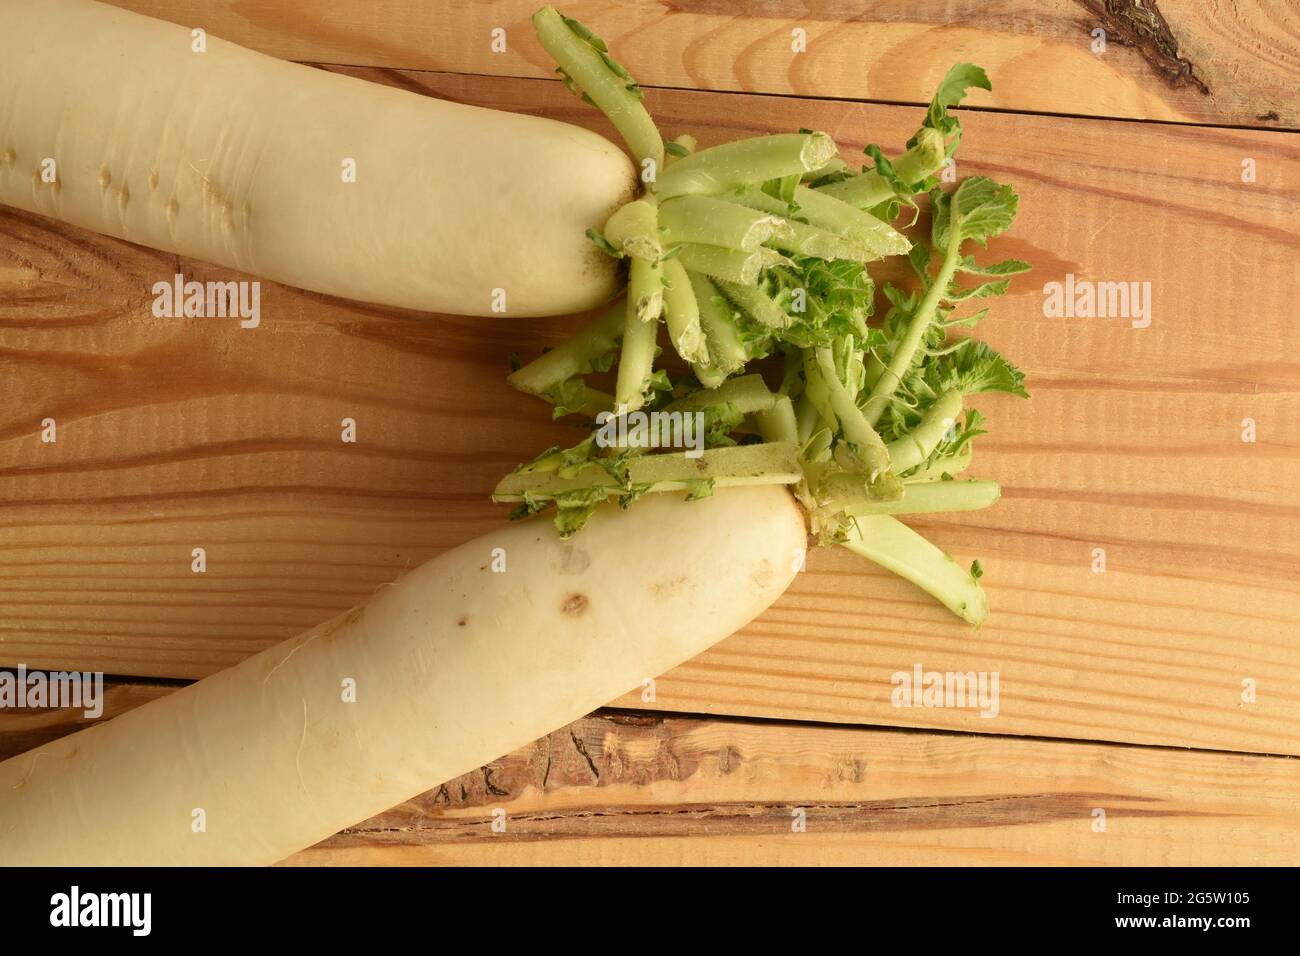 Two ripe organic radishes, close-up, on a wooden table, top view. Stock Photo